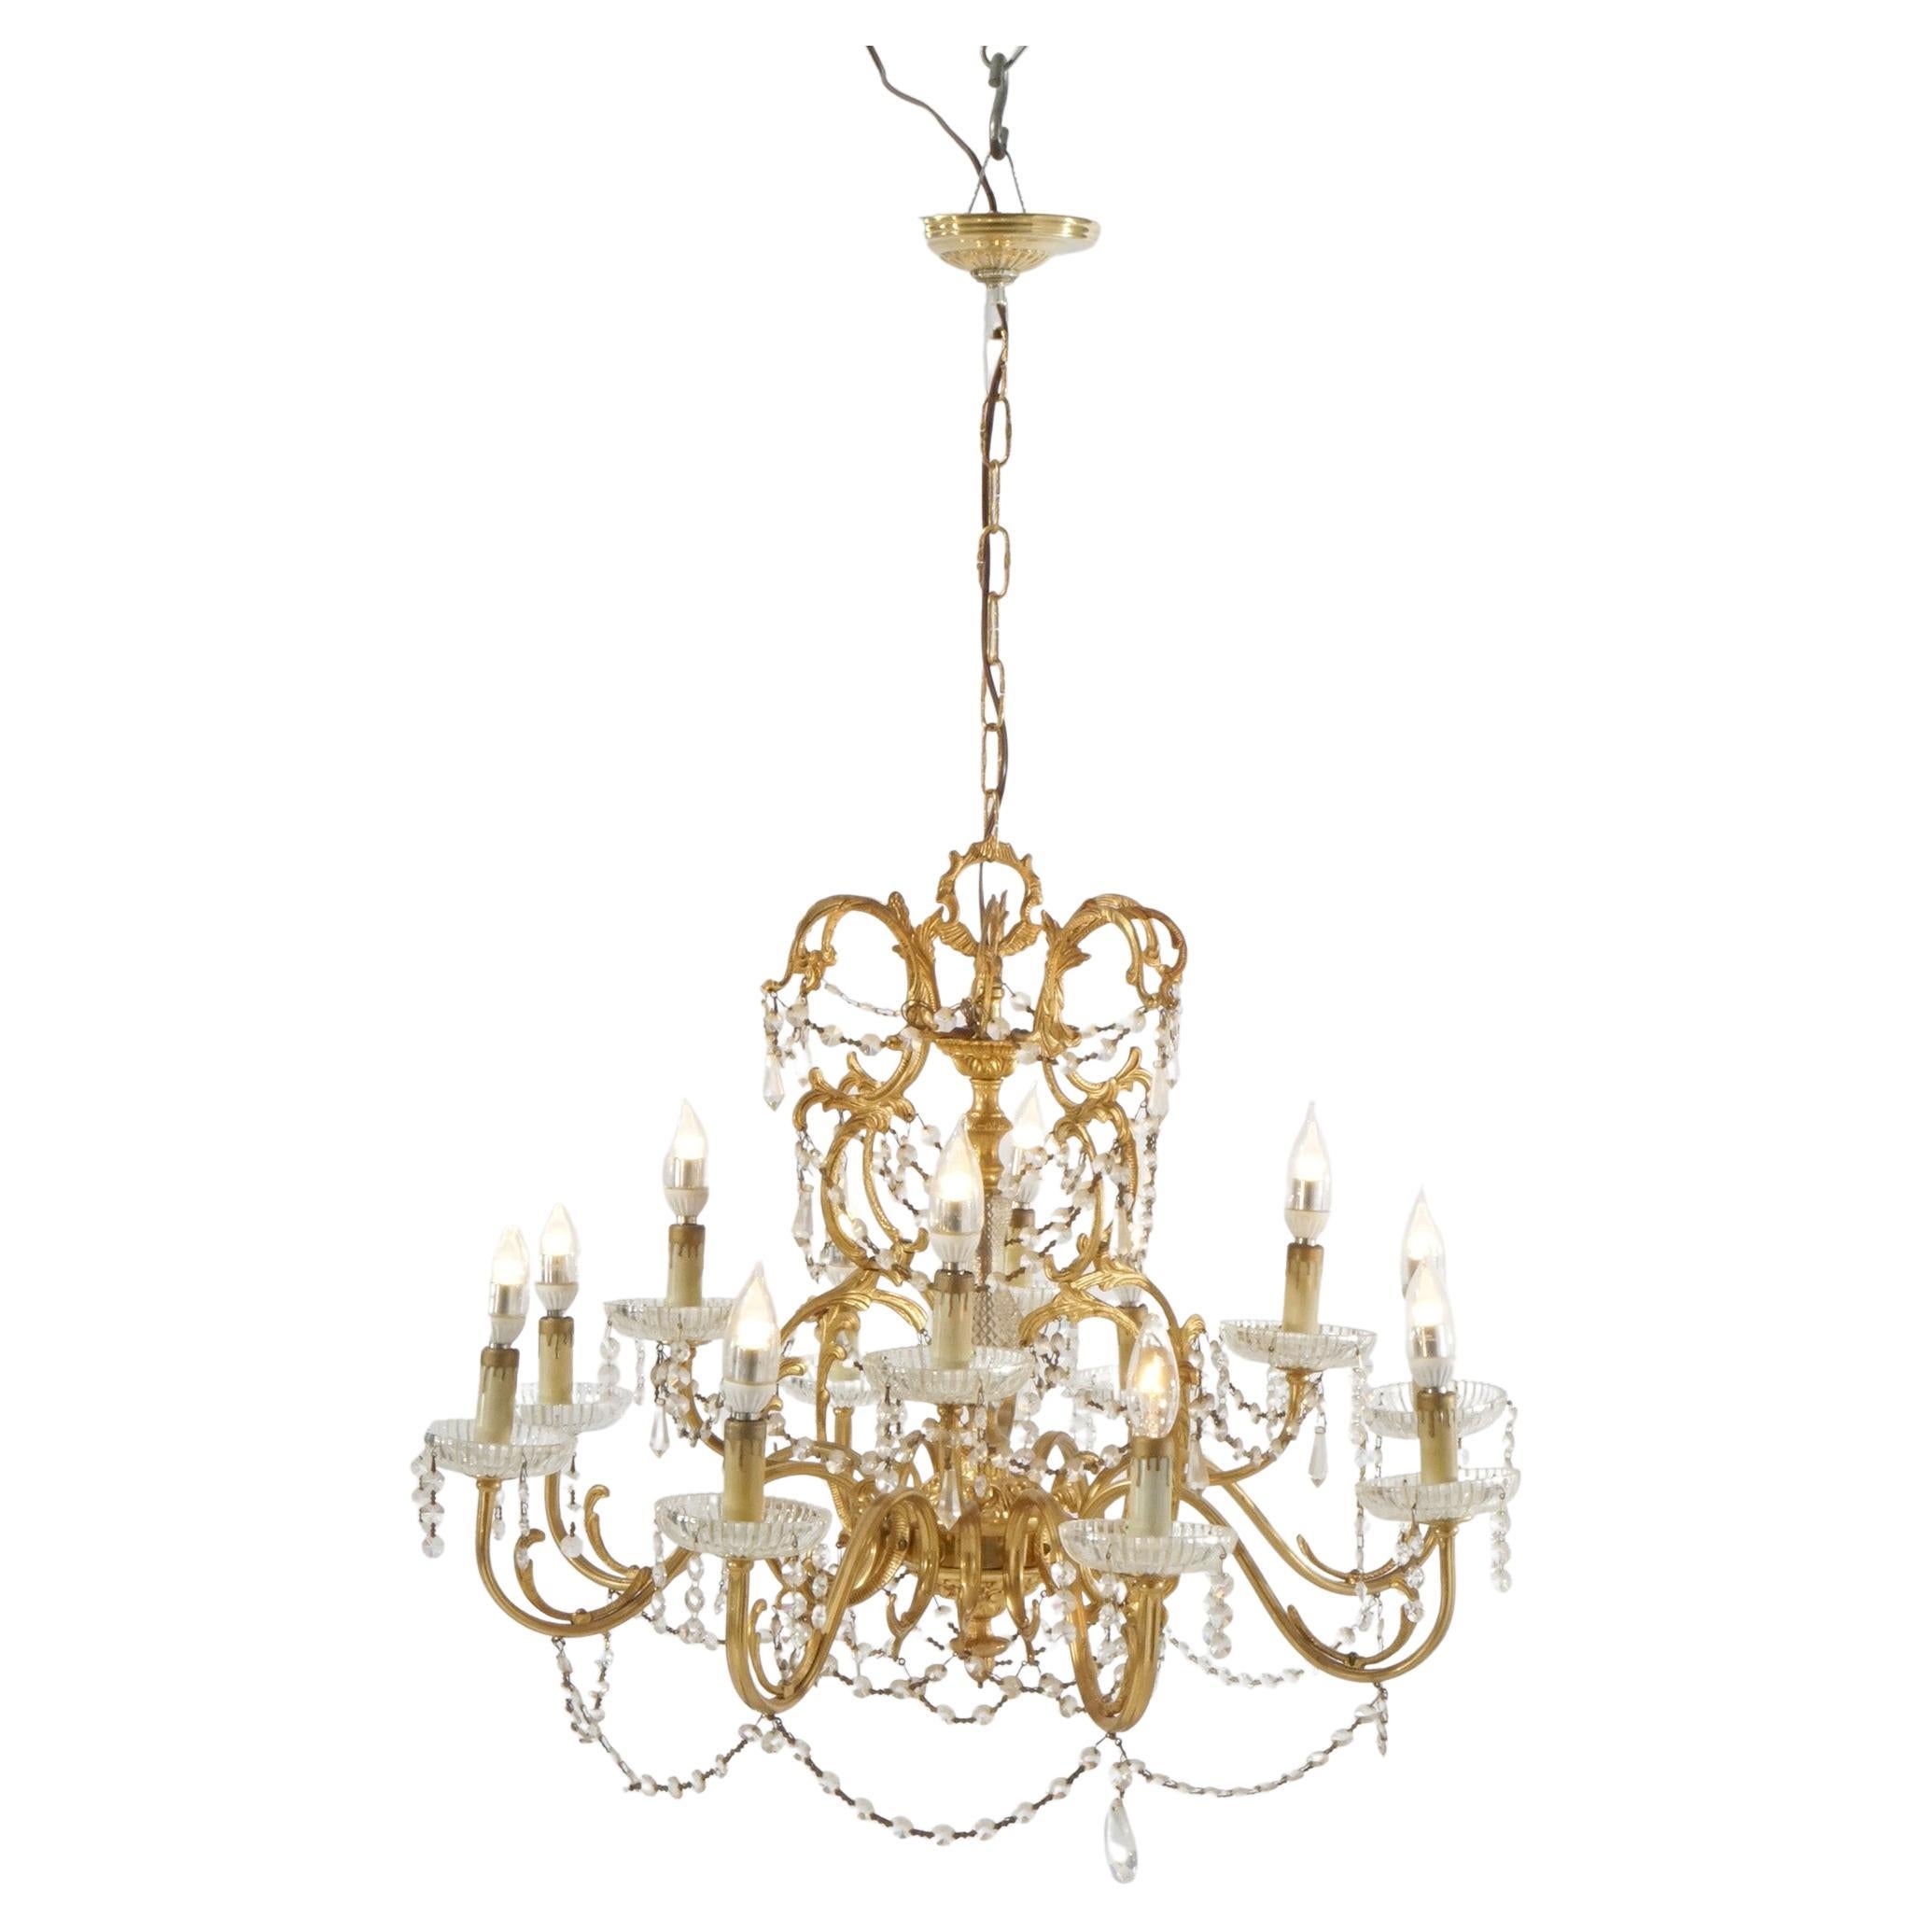 French Style Gilt & Crystal Twelve-Light Tiered Chandelier, Circa 1930 For Sale